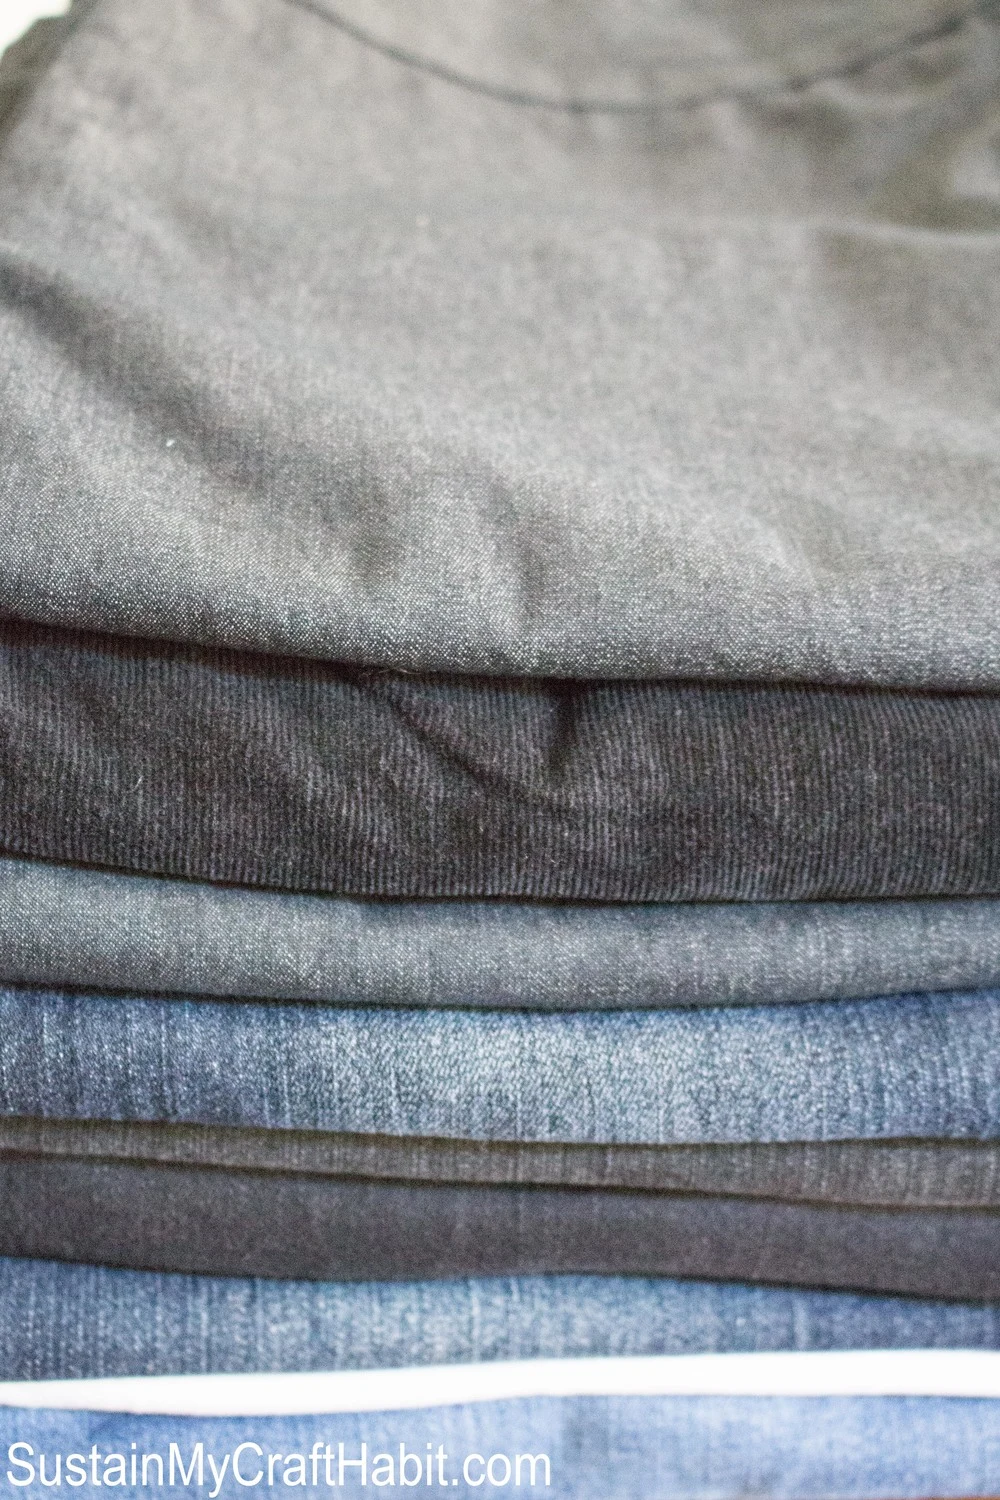 Close up view of a stack of old jeans showing different shades of blue and gray denim fabric.